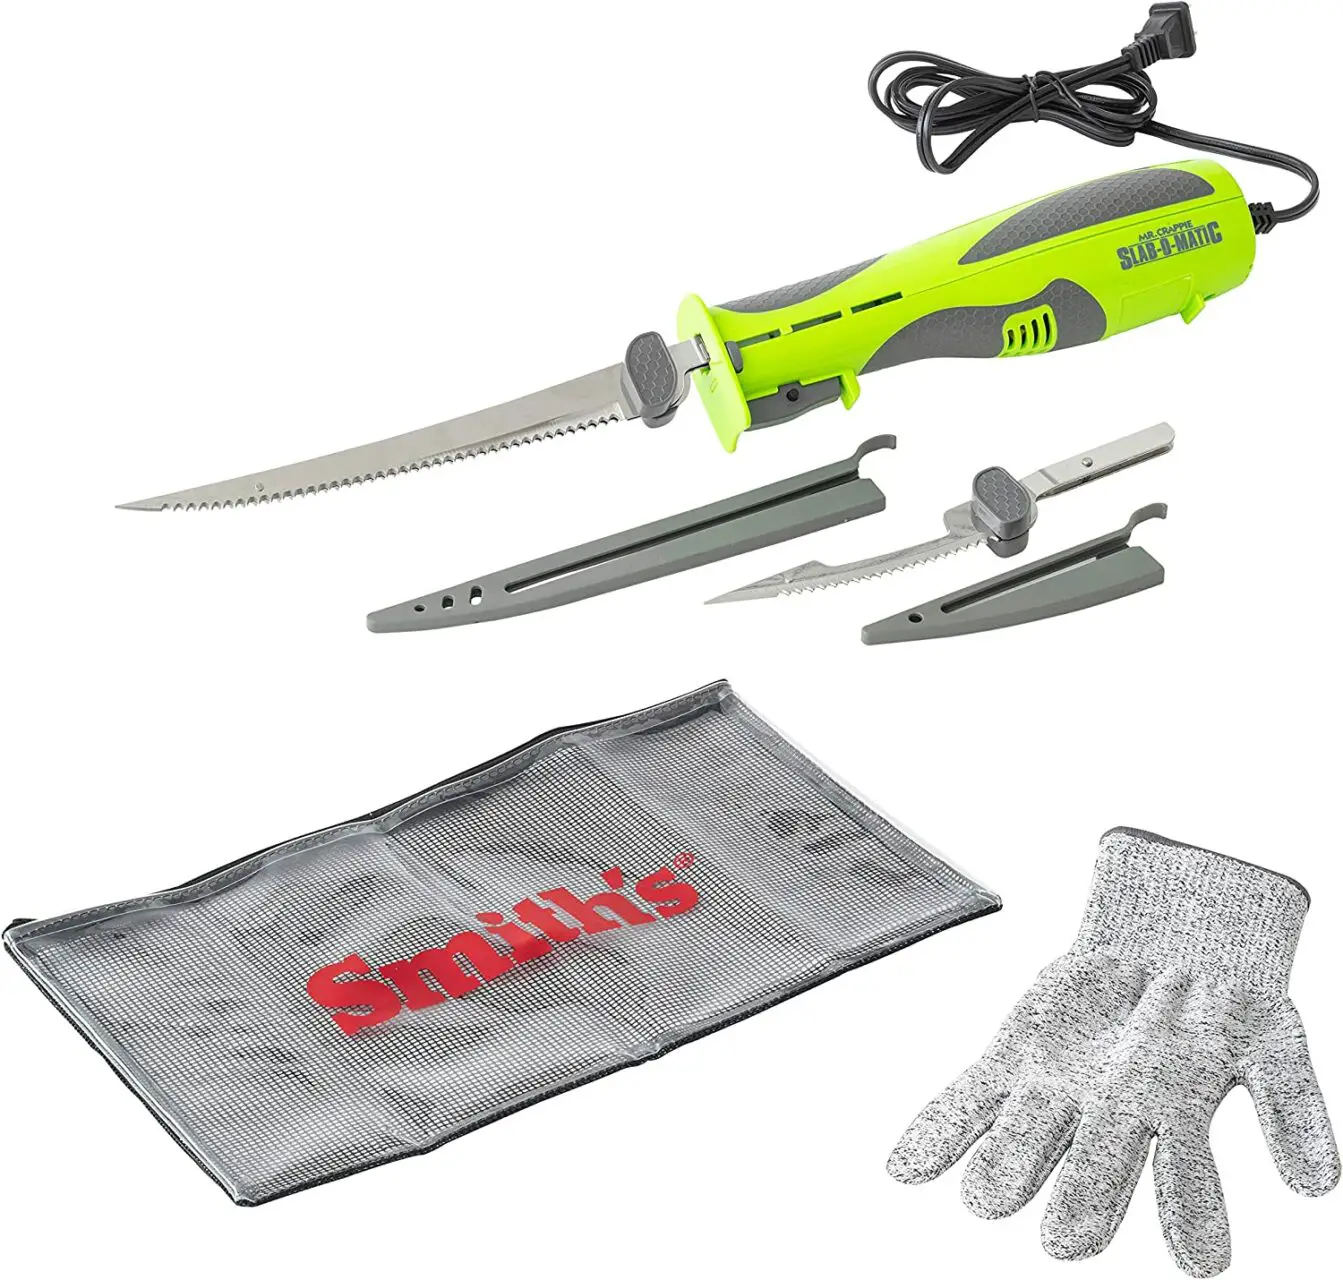 Smiths Mr. Crappie Electric Fillet Knife